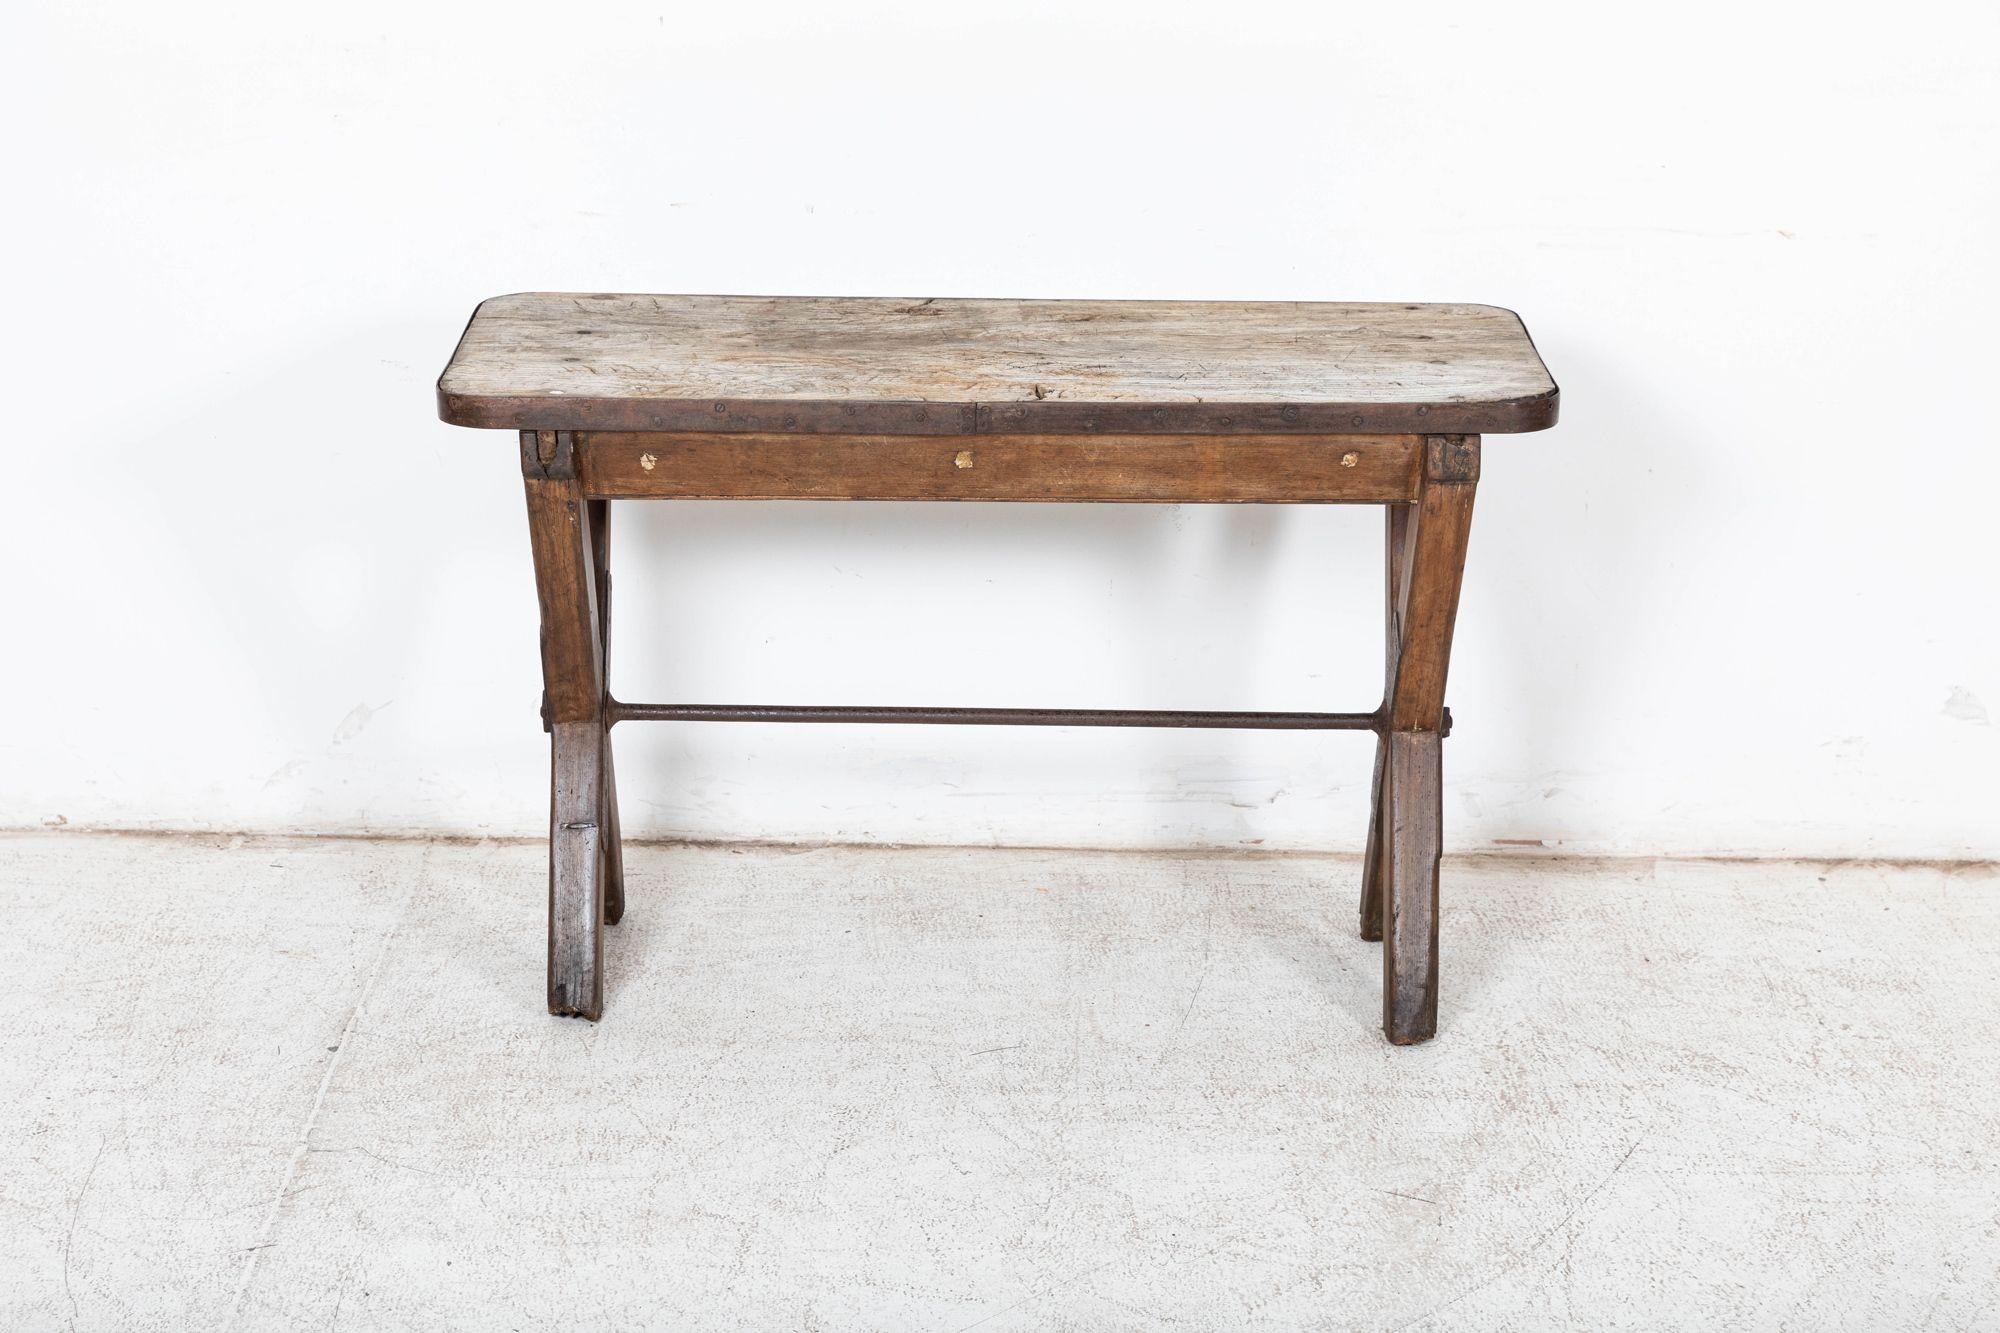 Circa 1870
19thC English Elm Topped Tavern Table with Iron Stretcher, Pine legs, and Banded Top.
(losses)
sku 1086
W115 x D46 x H72 cm